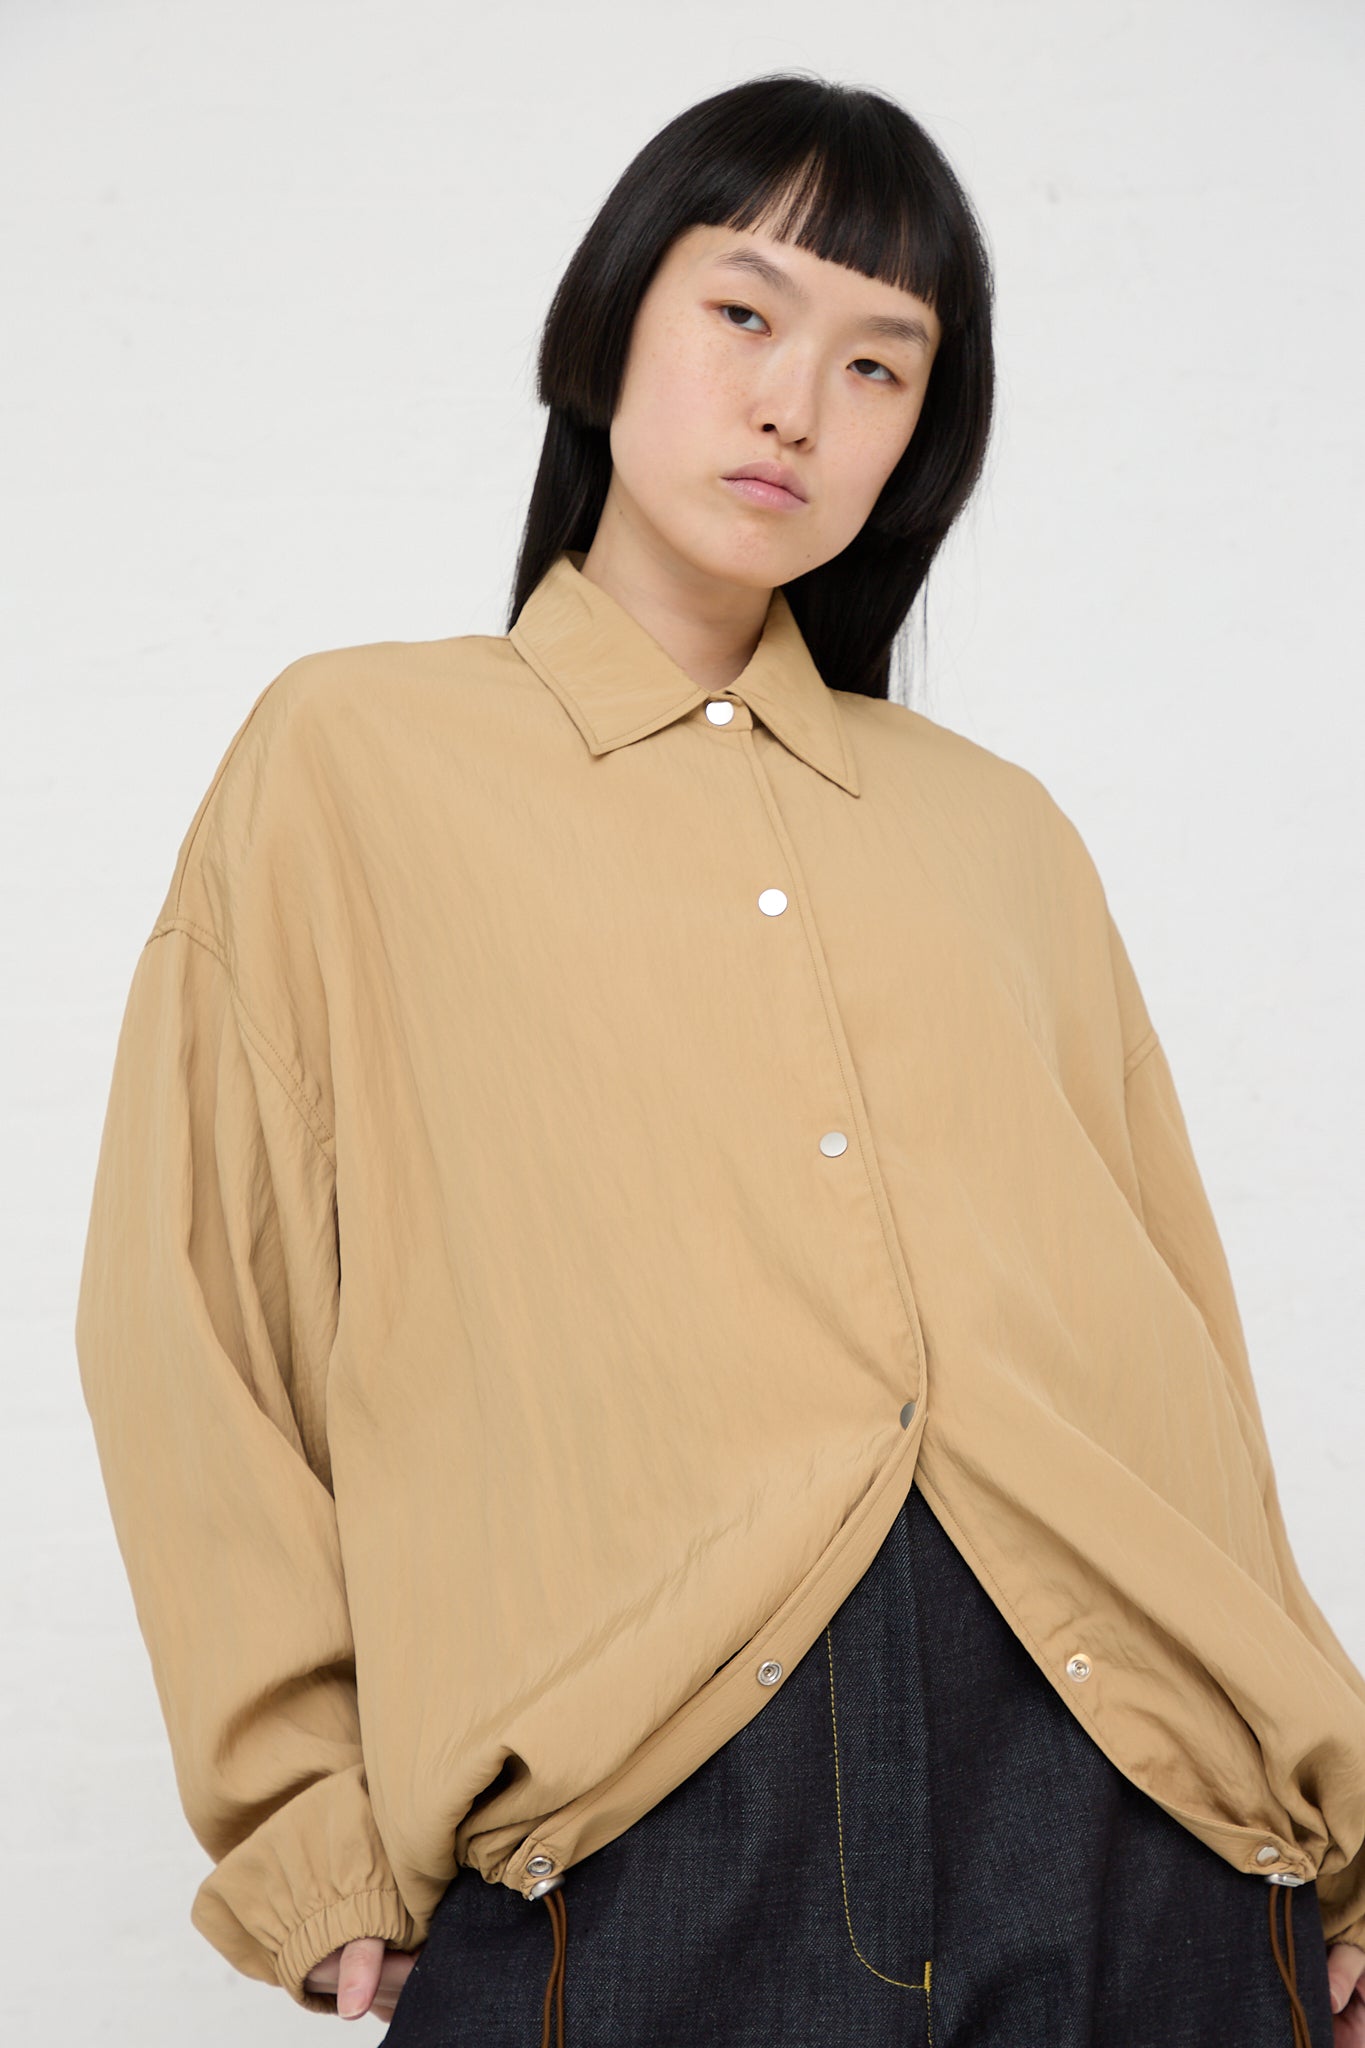 A woman wearing a Sprung Coach Jacket in Sand by Studio Nicholson made of a viscose blend fabric.